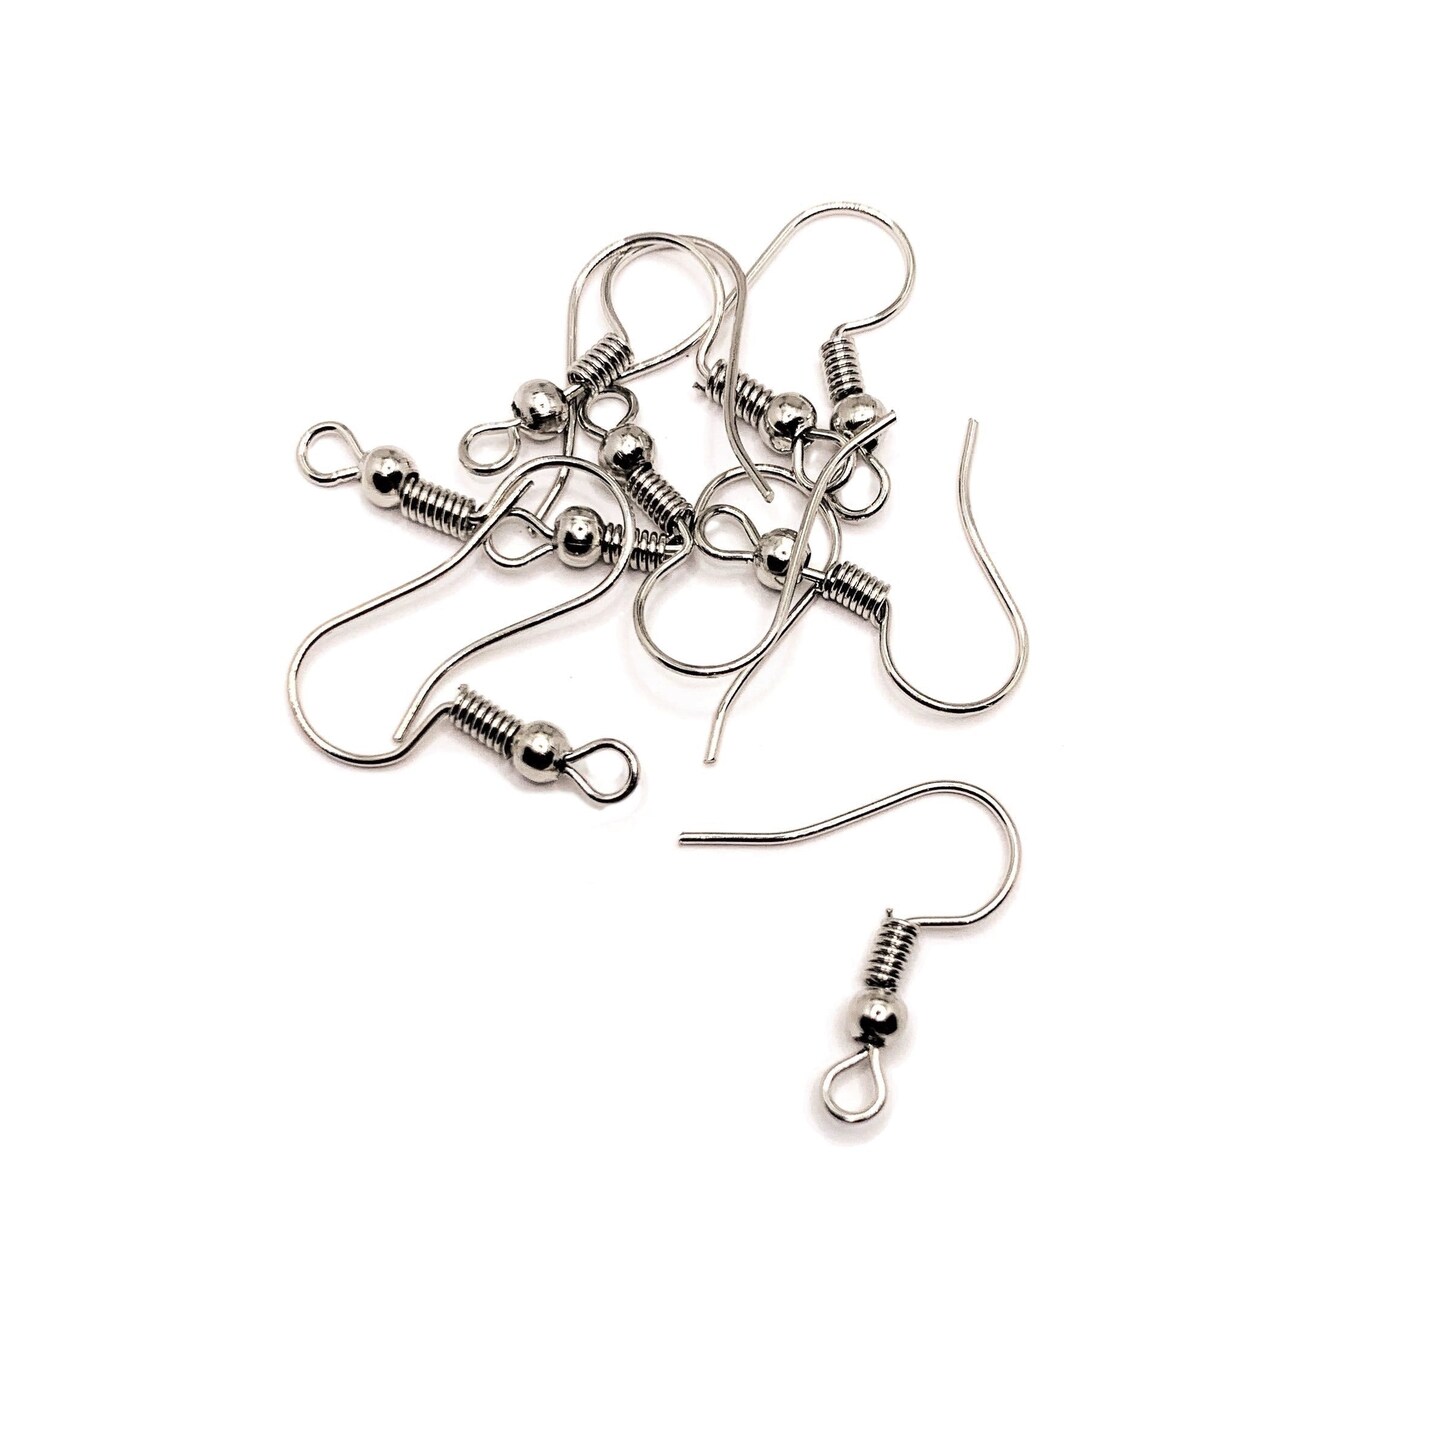 100 or 500 Pieces: Rhodium Silver Fish Hook Earring Wires with